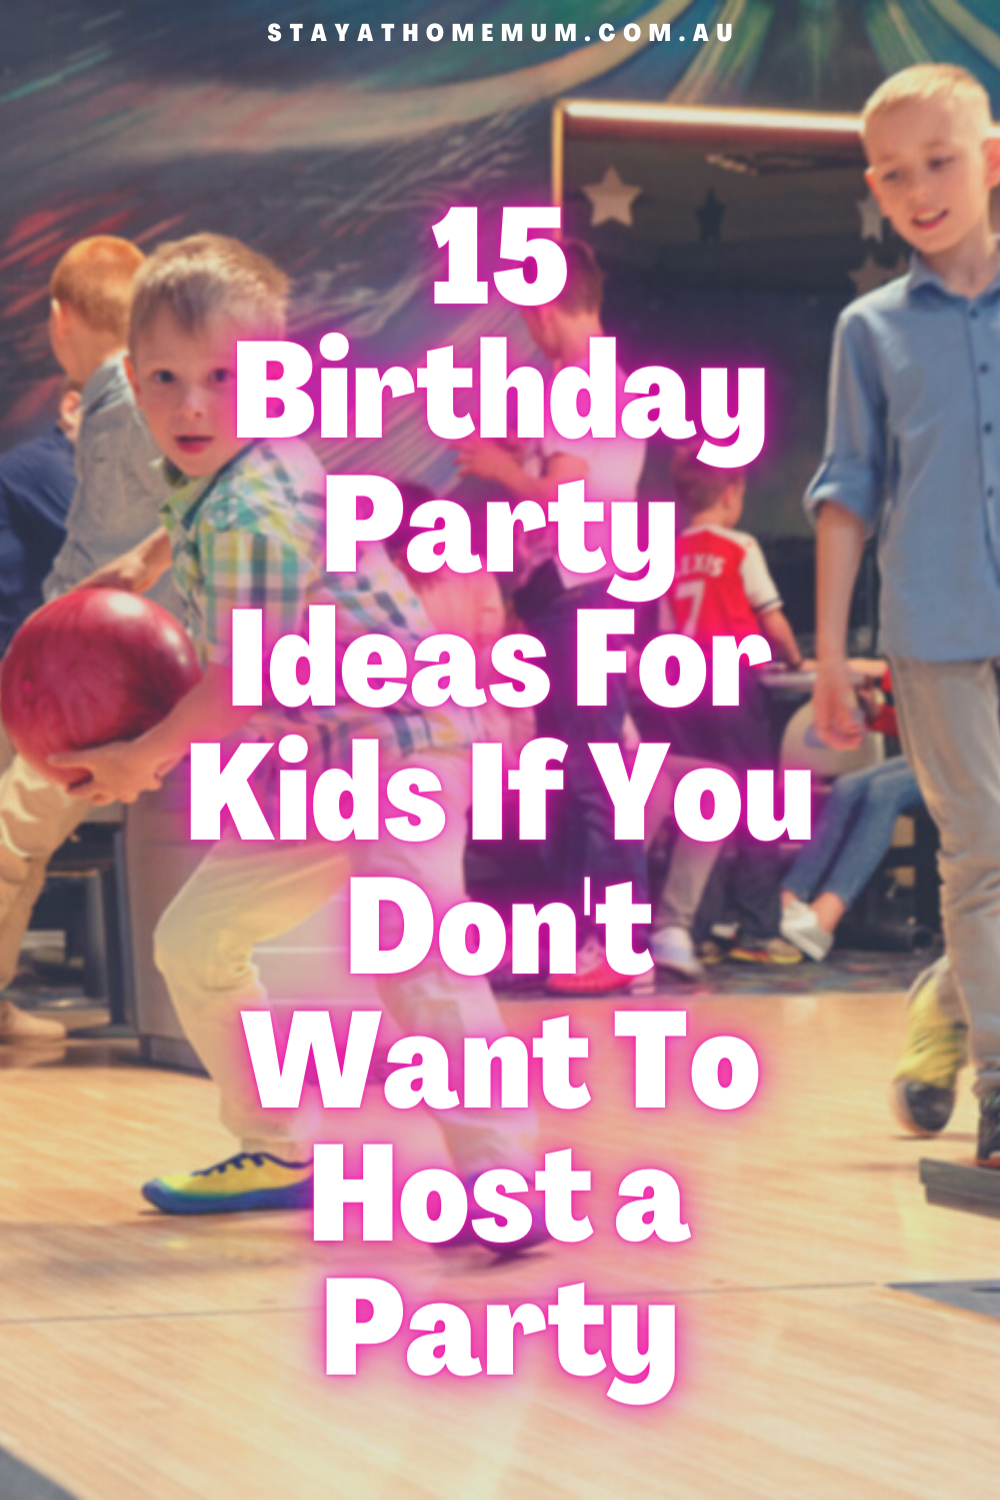 15 Birthday Party Ideas For Kids If You Don't Want To Host a Party | Stay At Home Mum